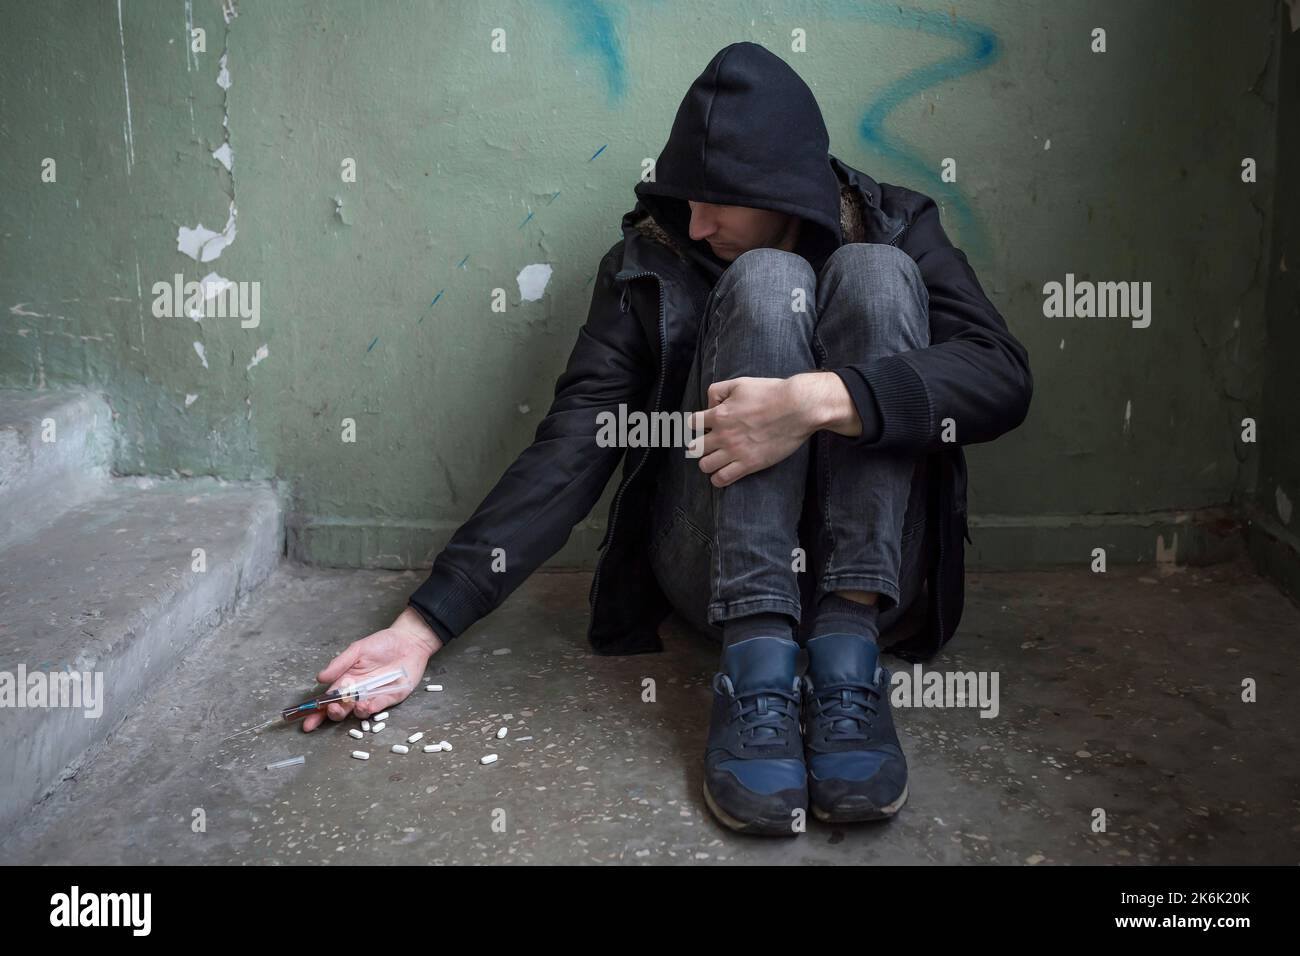 A male drug addict with a syringe is using drugs sitting on the floor. International Day Against Drug Abuse. Addiction concept. Stock Photo